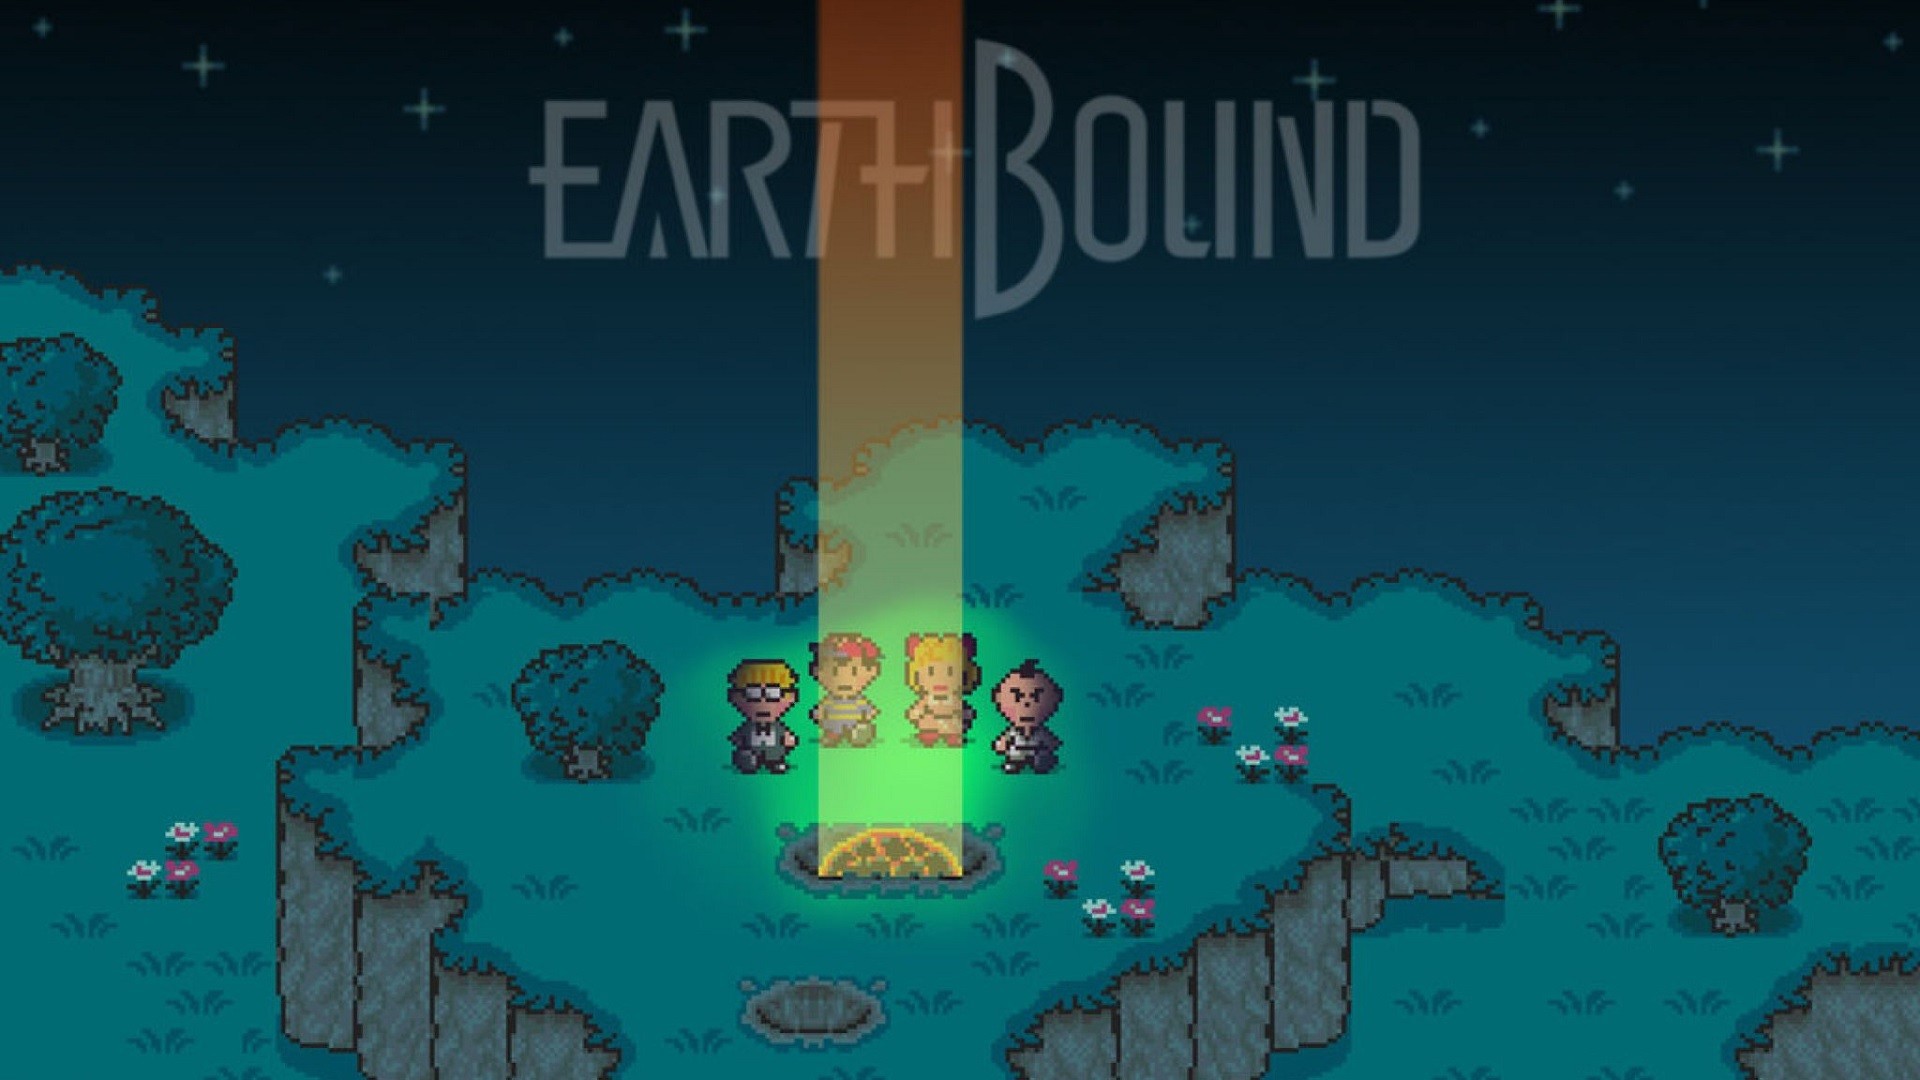 1920x1080 Video Game - Earthbound Wallpaper